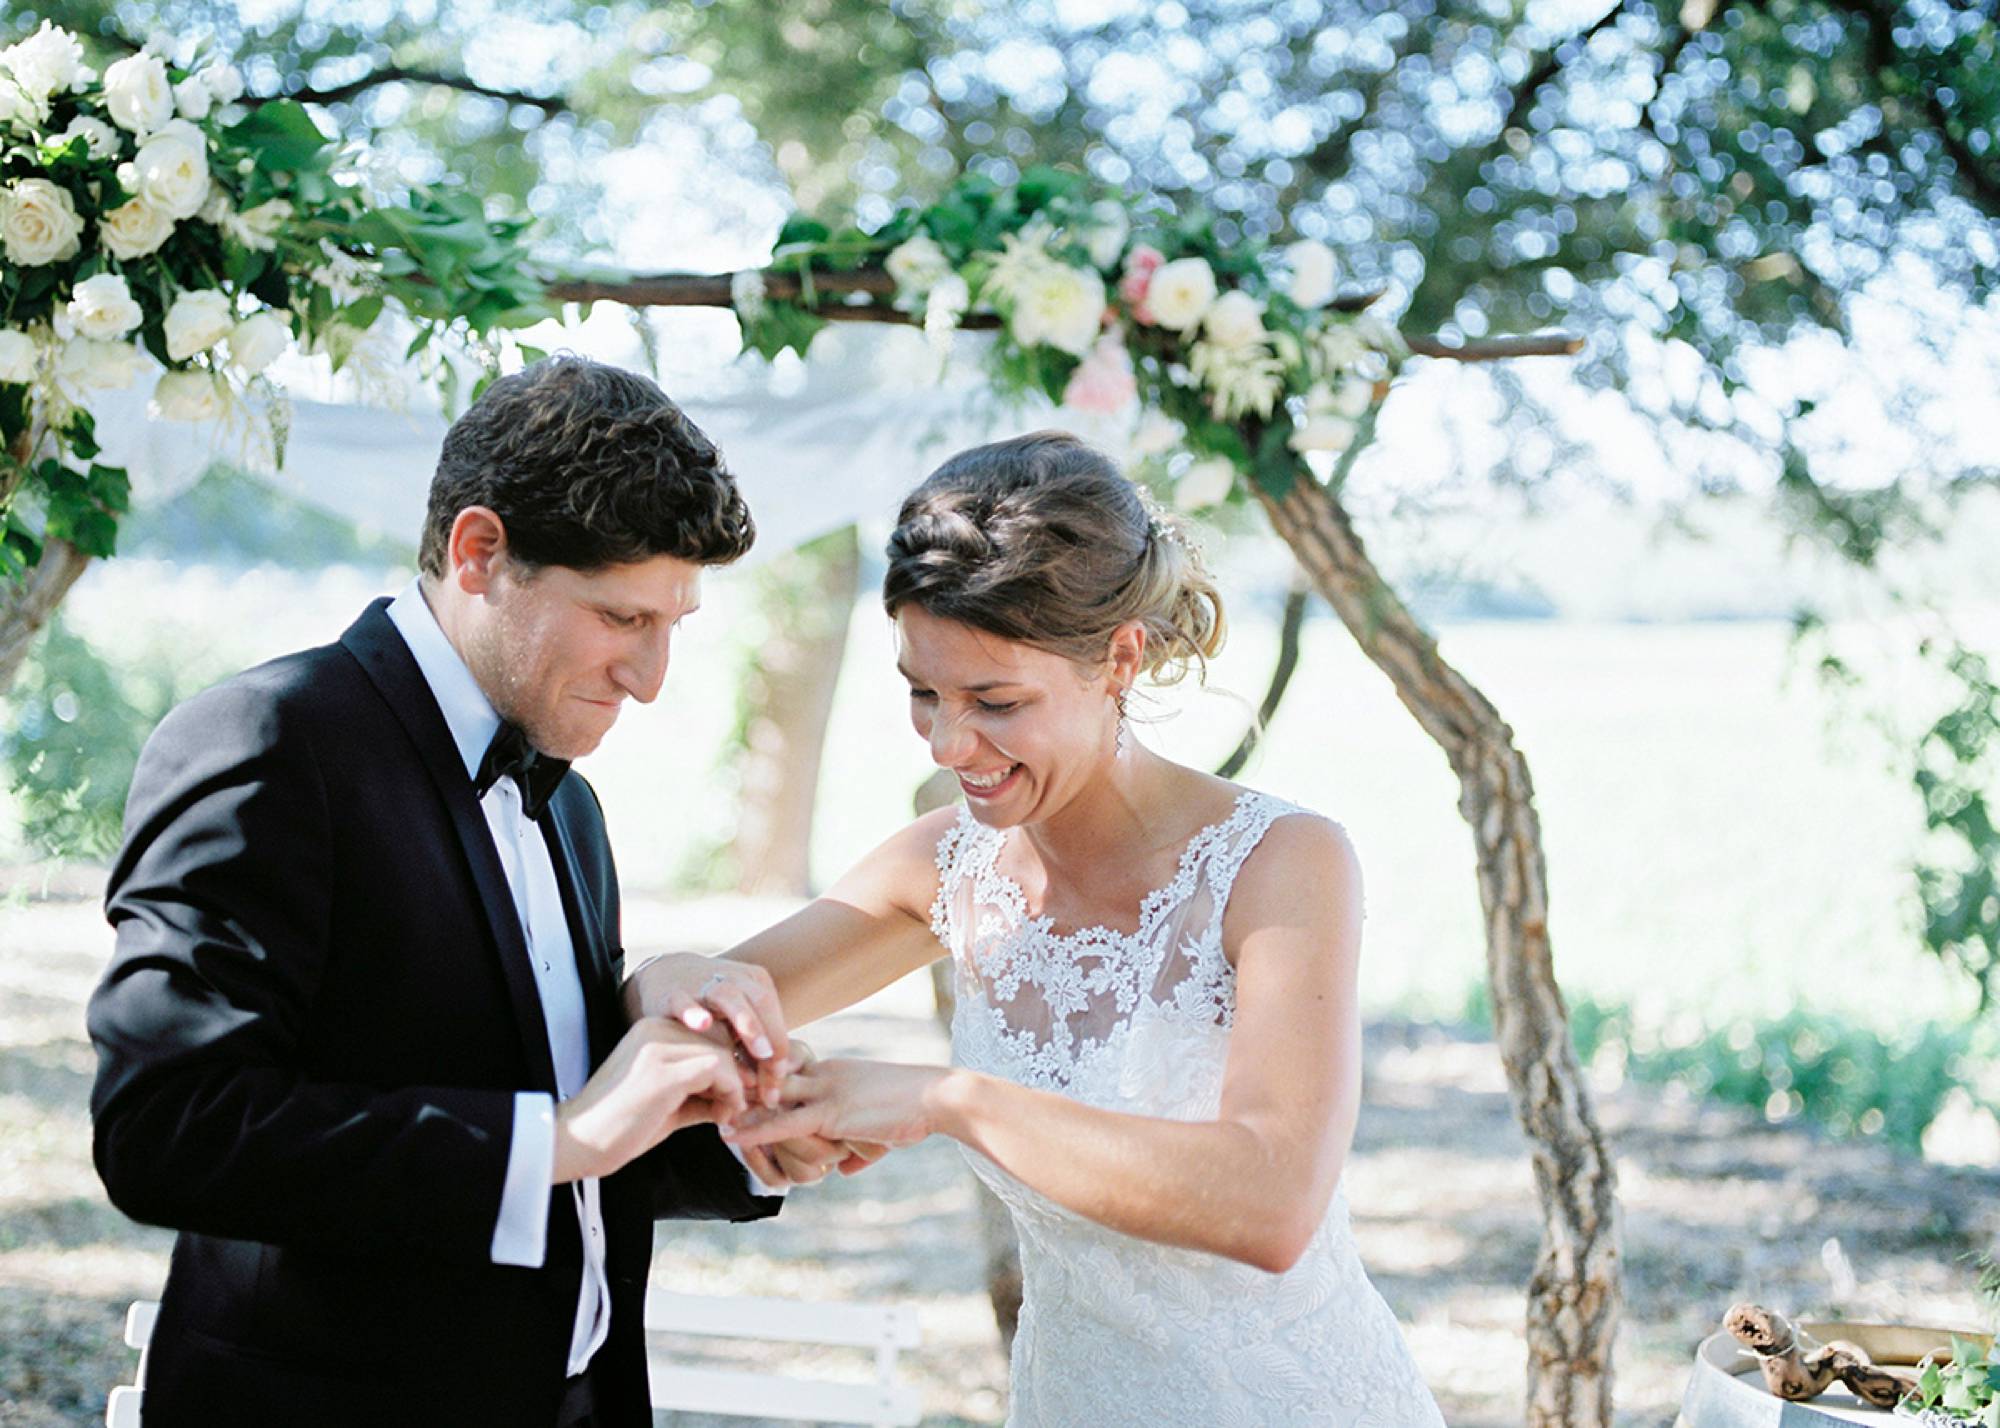 Fine art photographer South of France - Exchanging rings at the ceremony